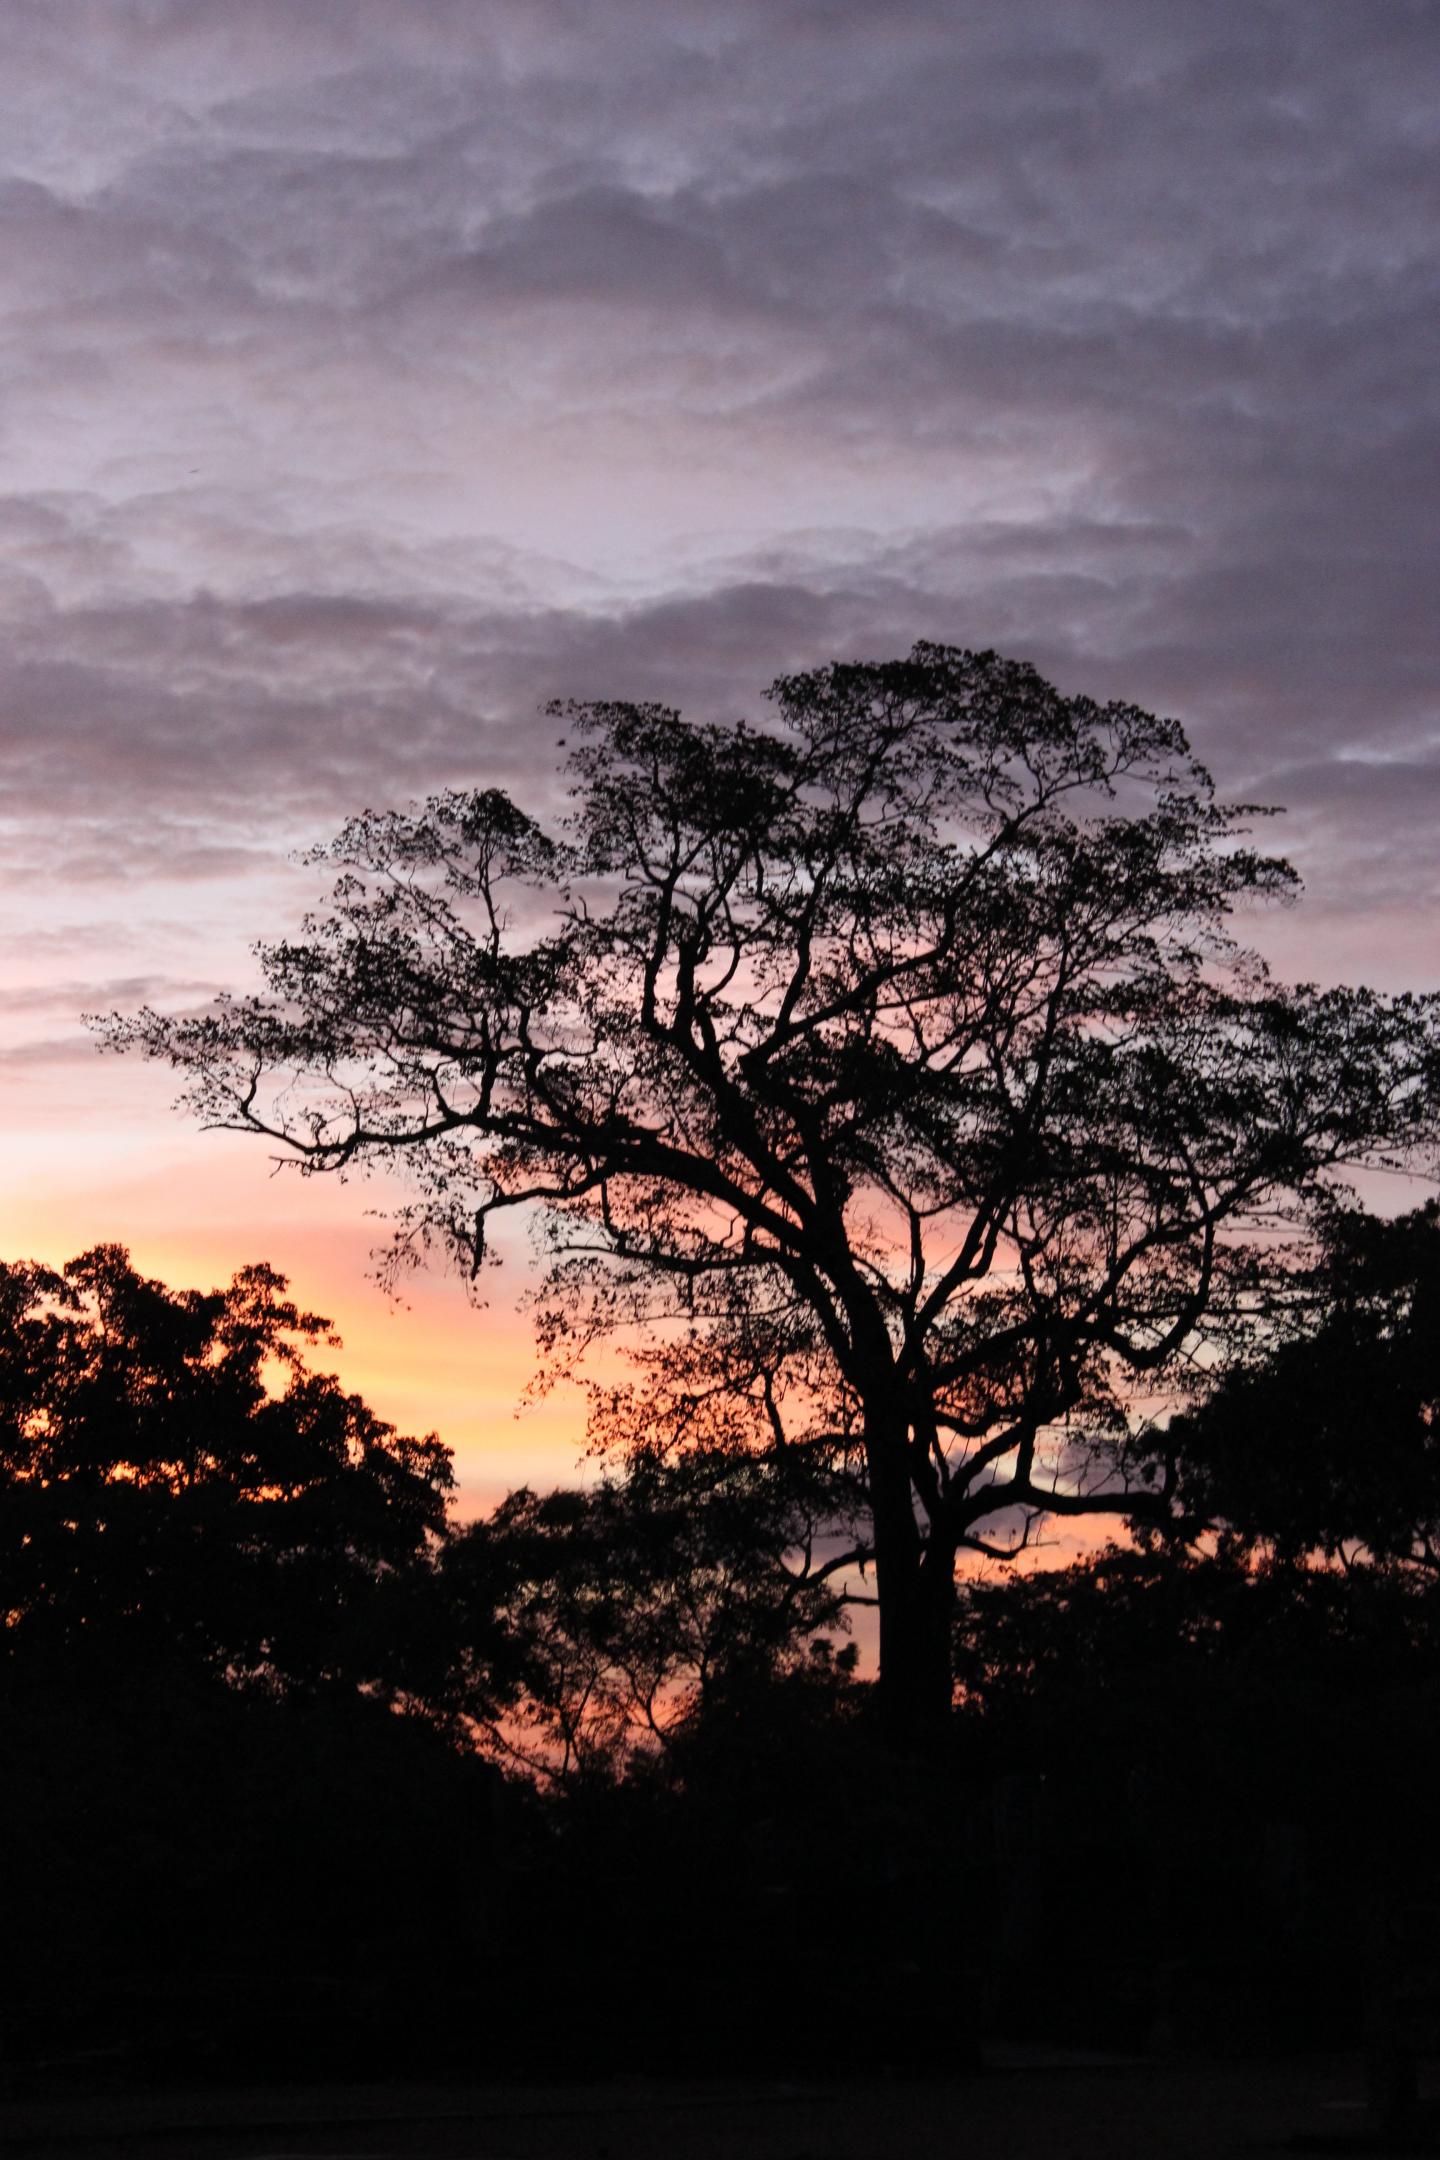 View from the Ancient City of Polonnaurwa into Sri Lankan Dry Zone Tropical Forest at Dusk